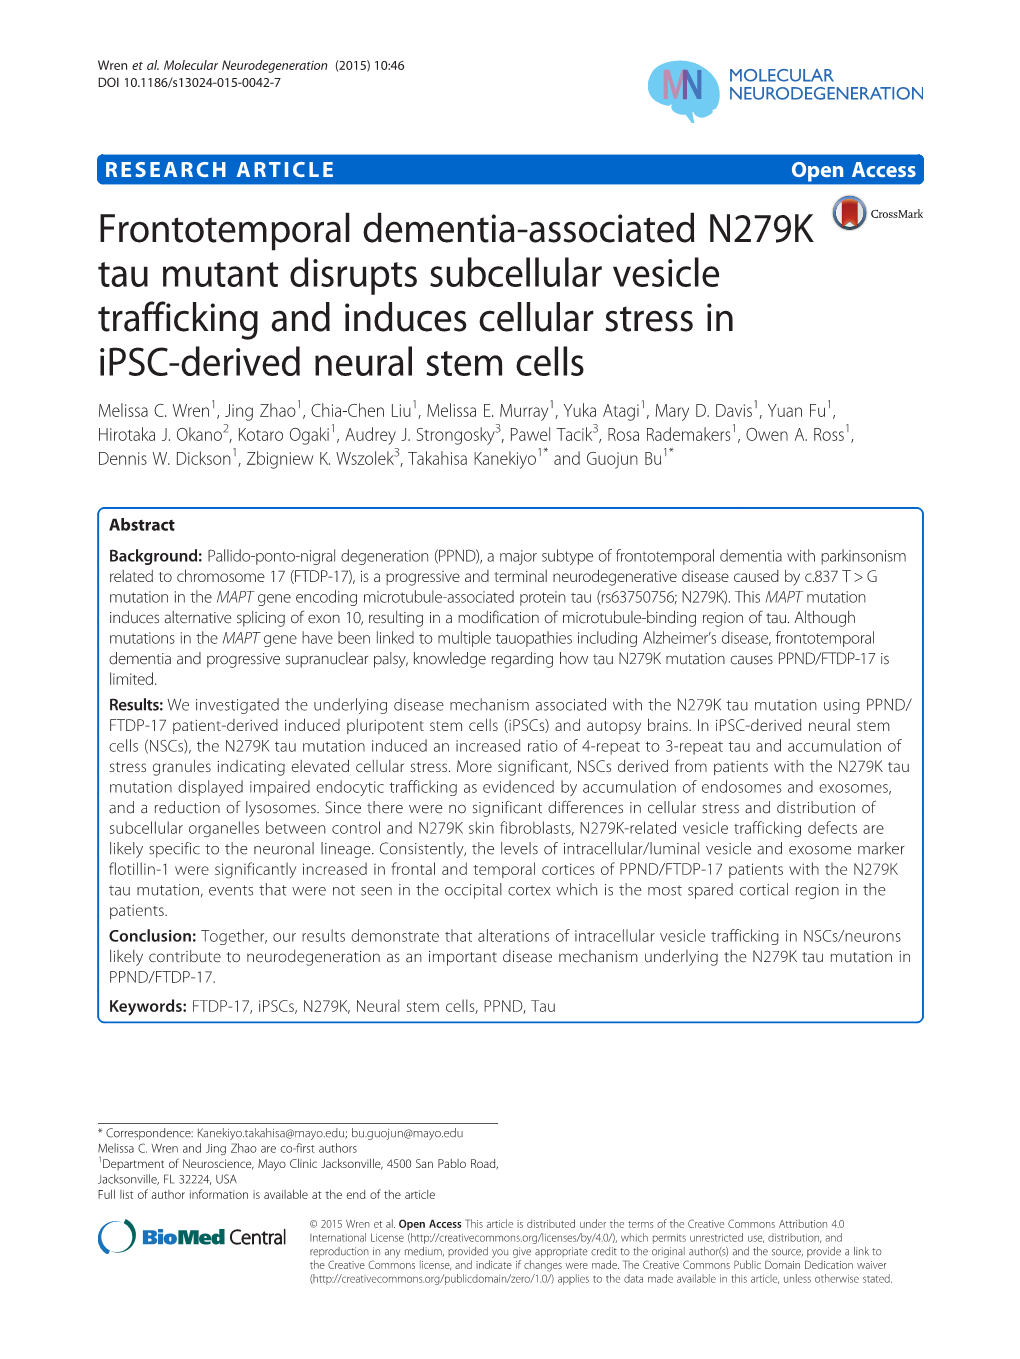 Frontotemporal Dementia-Associated N279K Tau Mutant Disrupts Subcellular Vesicle Trafficking and Induces Cellular Stress in Ipsc-Derived Neural Stem Cells Melissa C